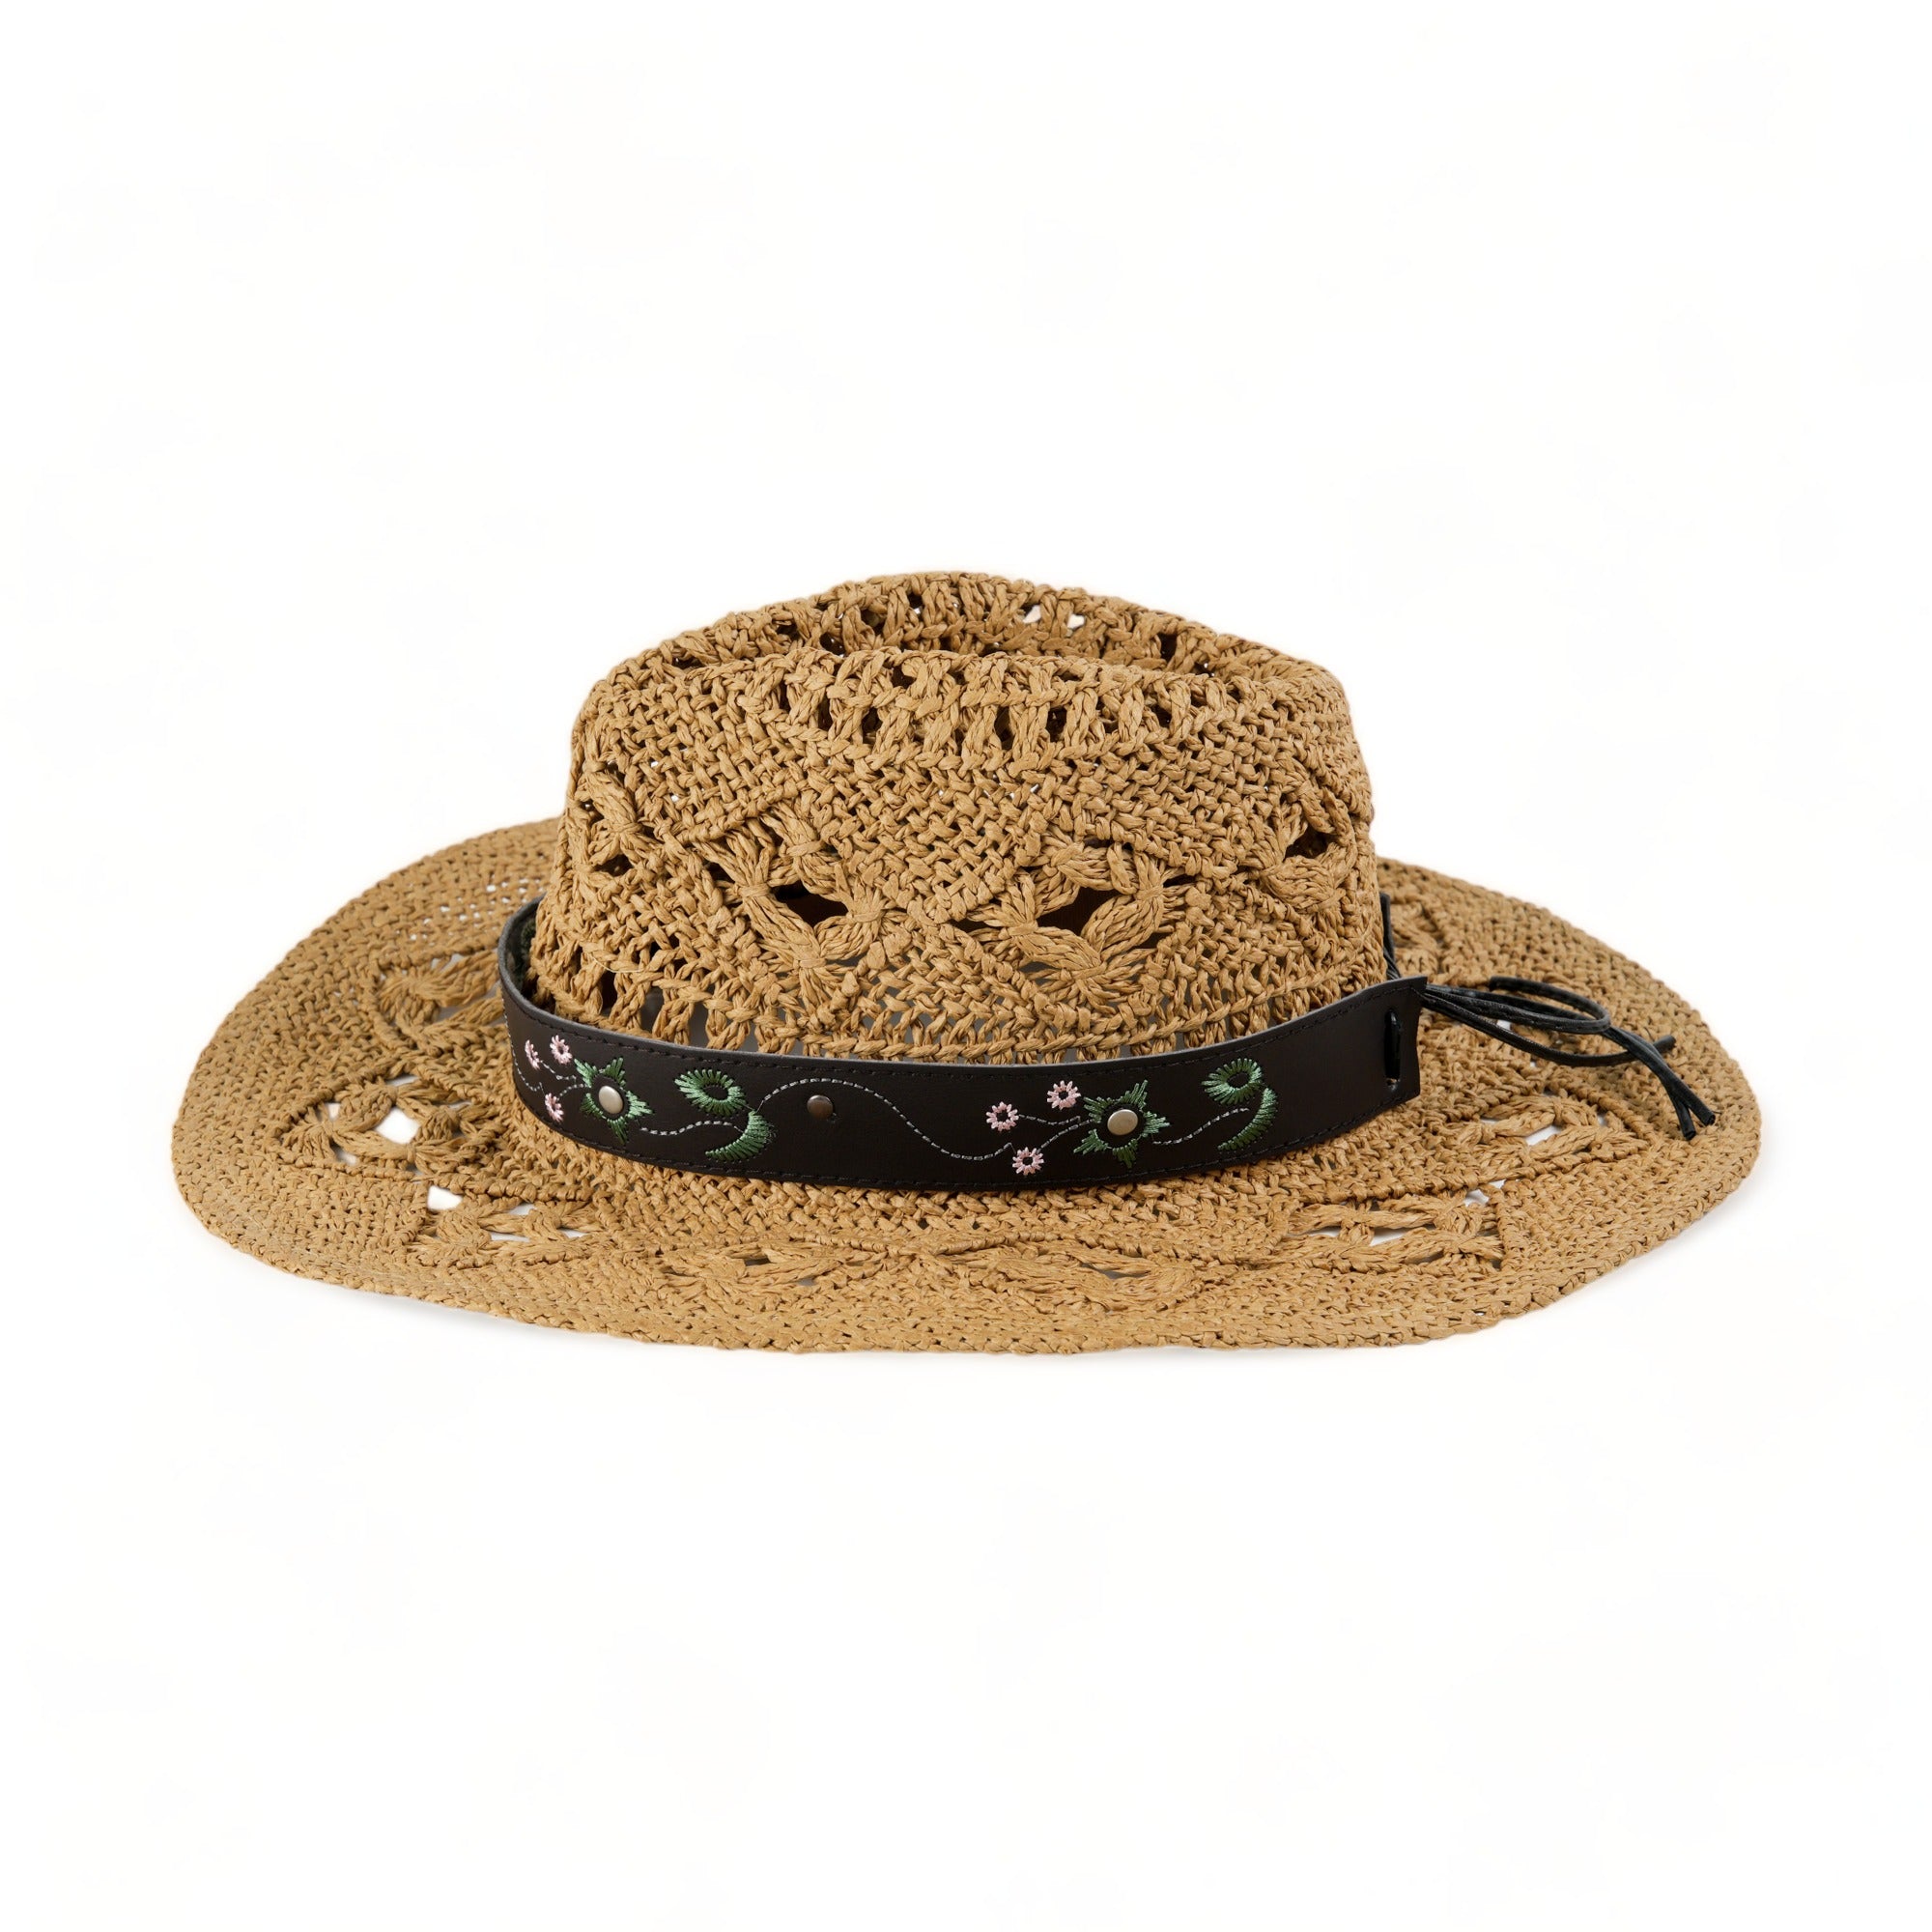 "Chokore Handcrafted Cowboy Hat with Embroidered Belt (Khaki) "